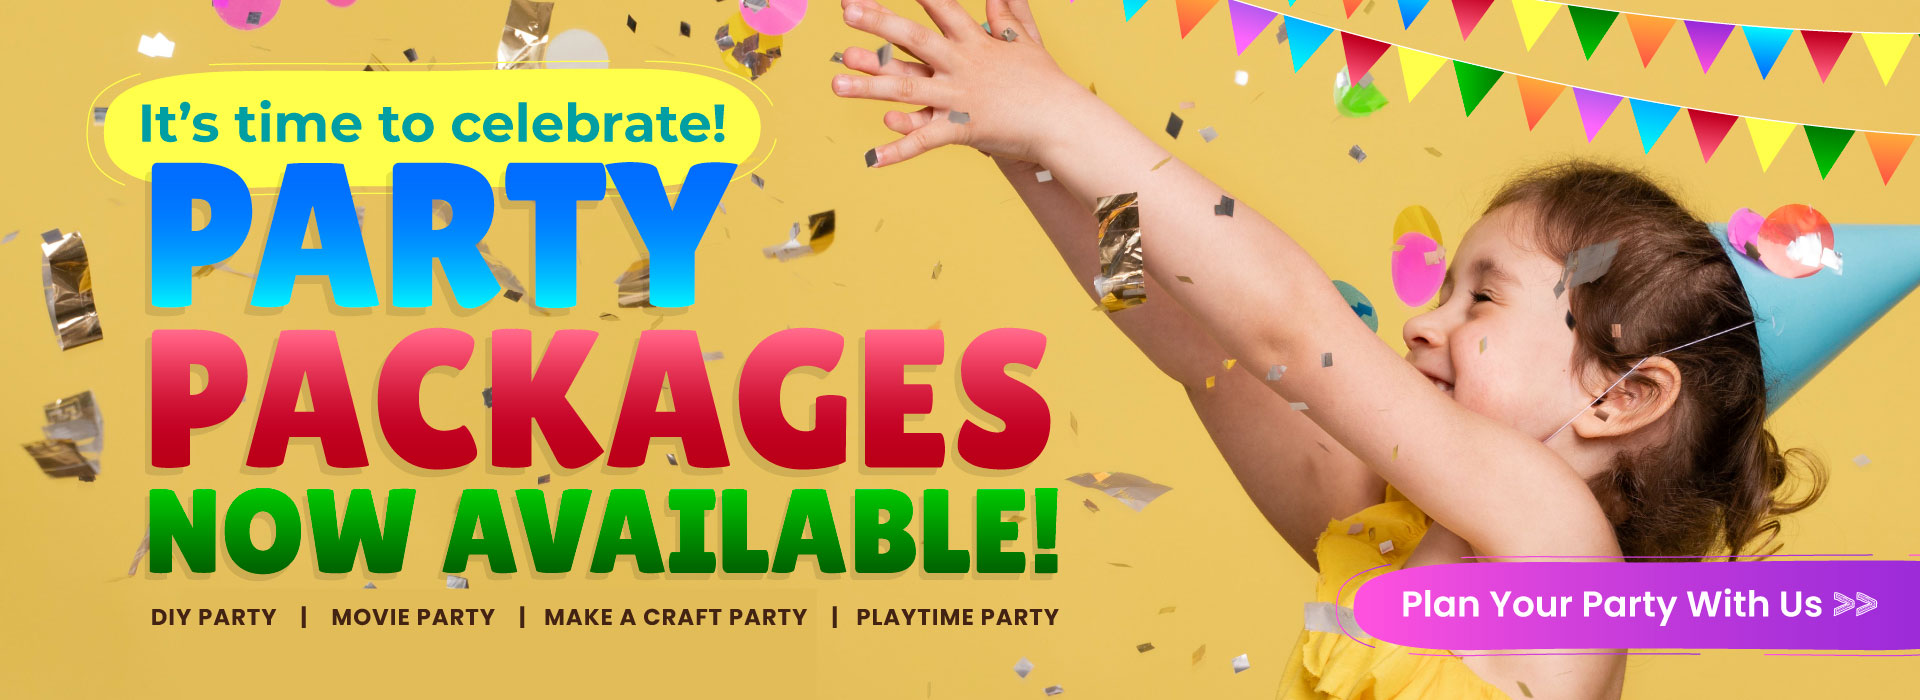 Party Packages Now Available